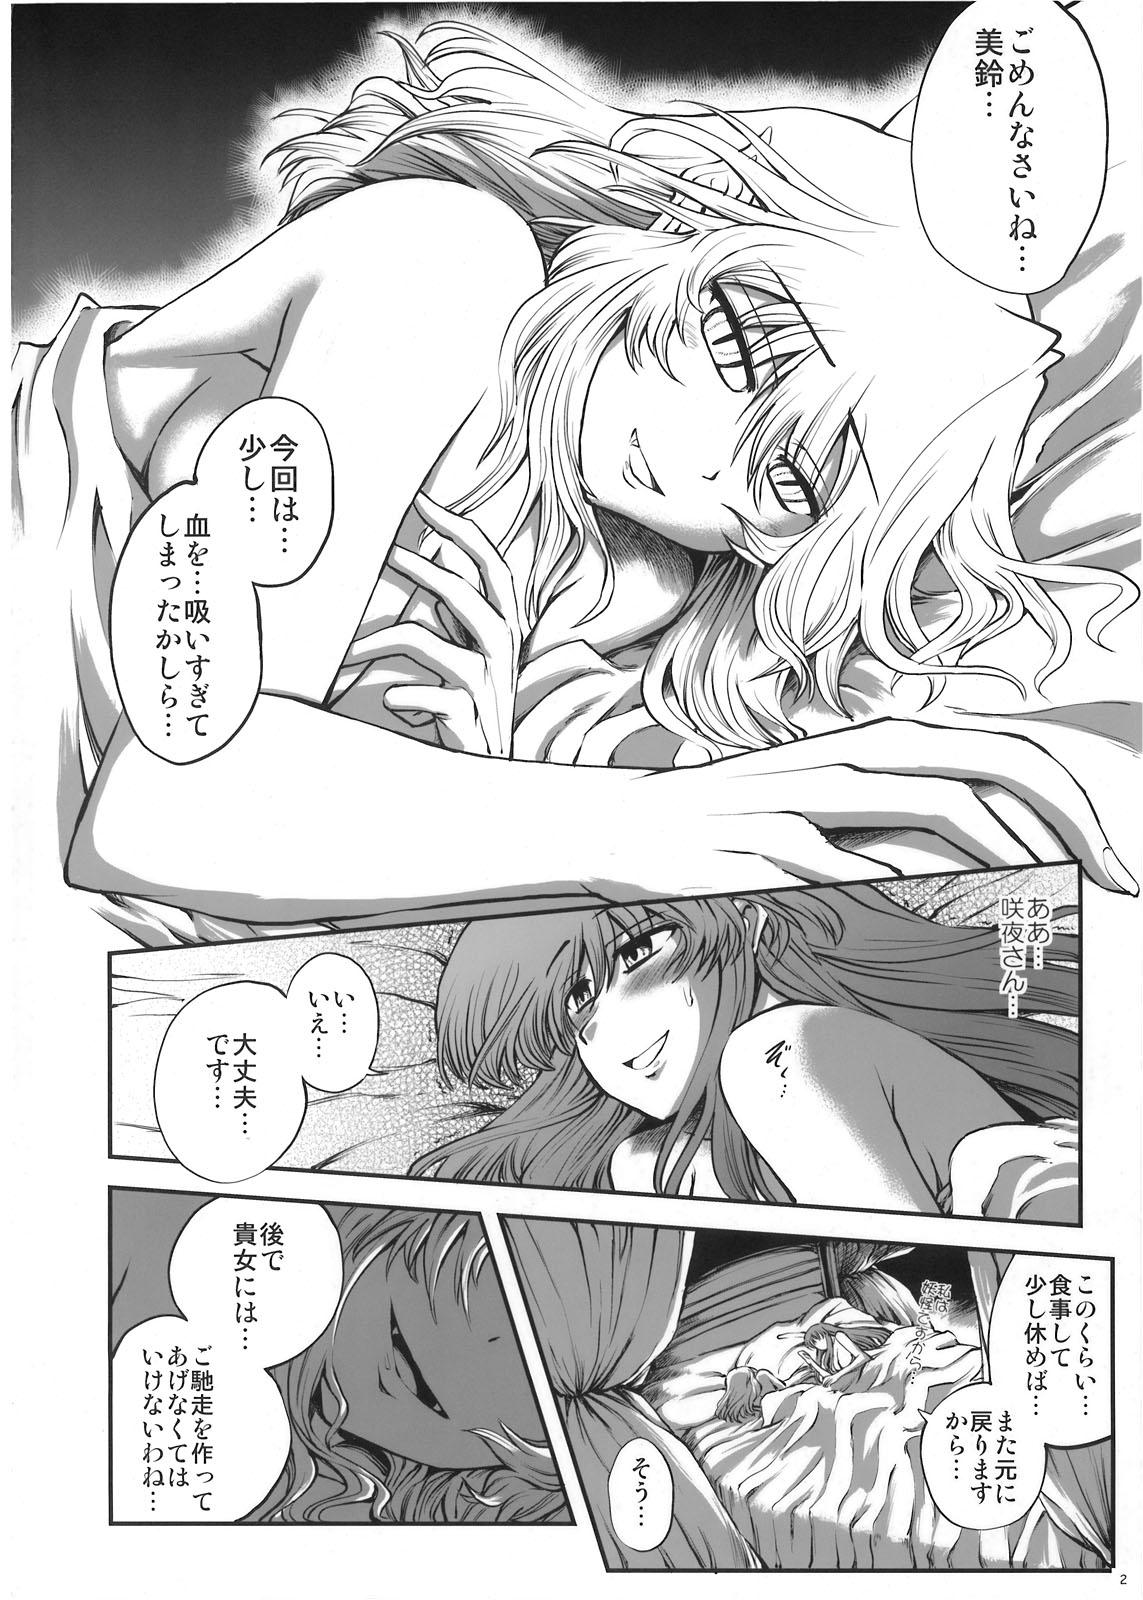 Arrecha Luna Dial Maid to Chi no Unmei dokei Lunatic+alpha - Touhou project Old Man - Page 3